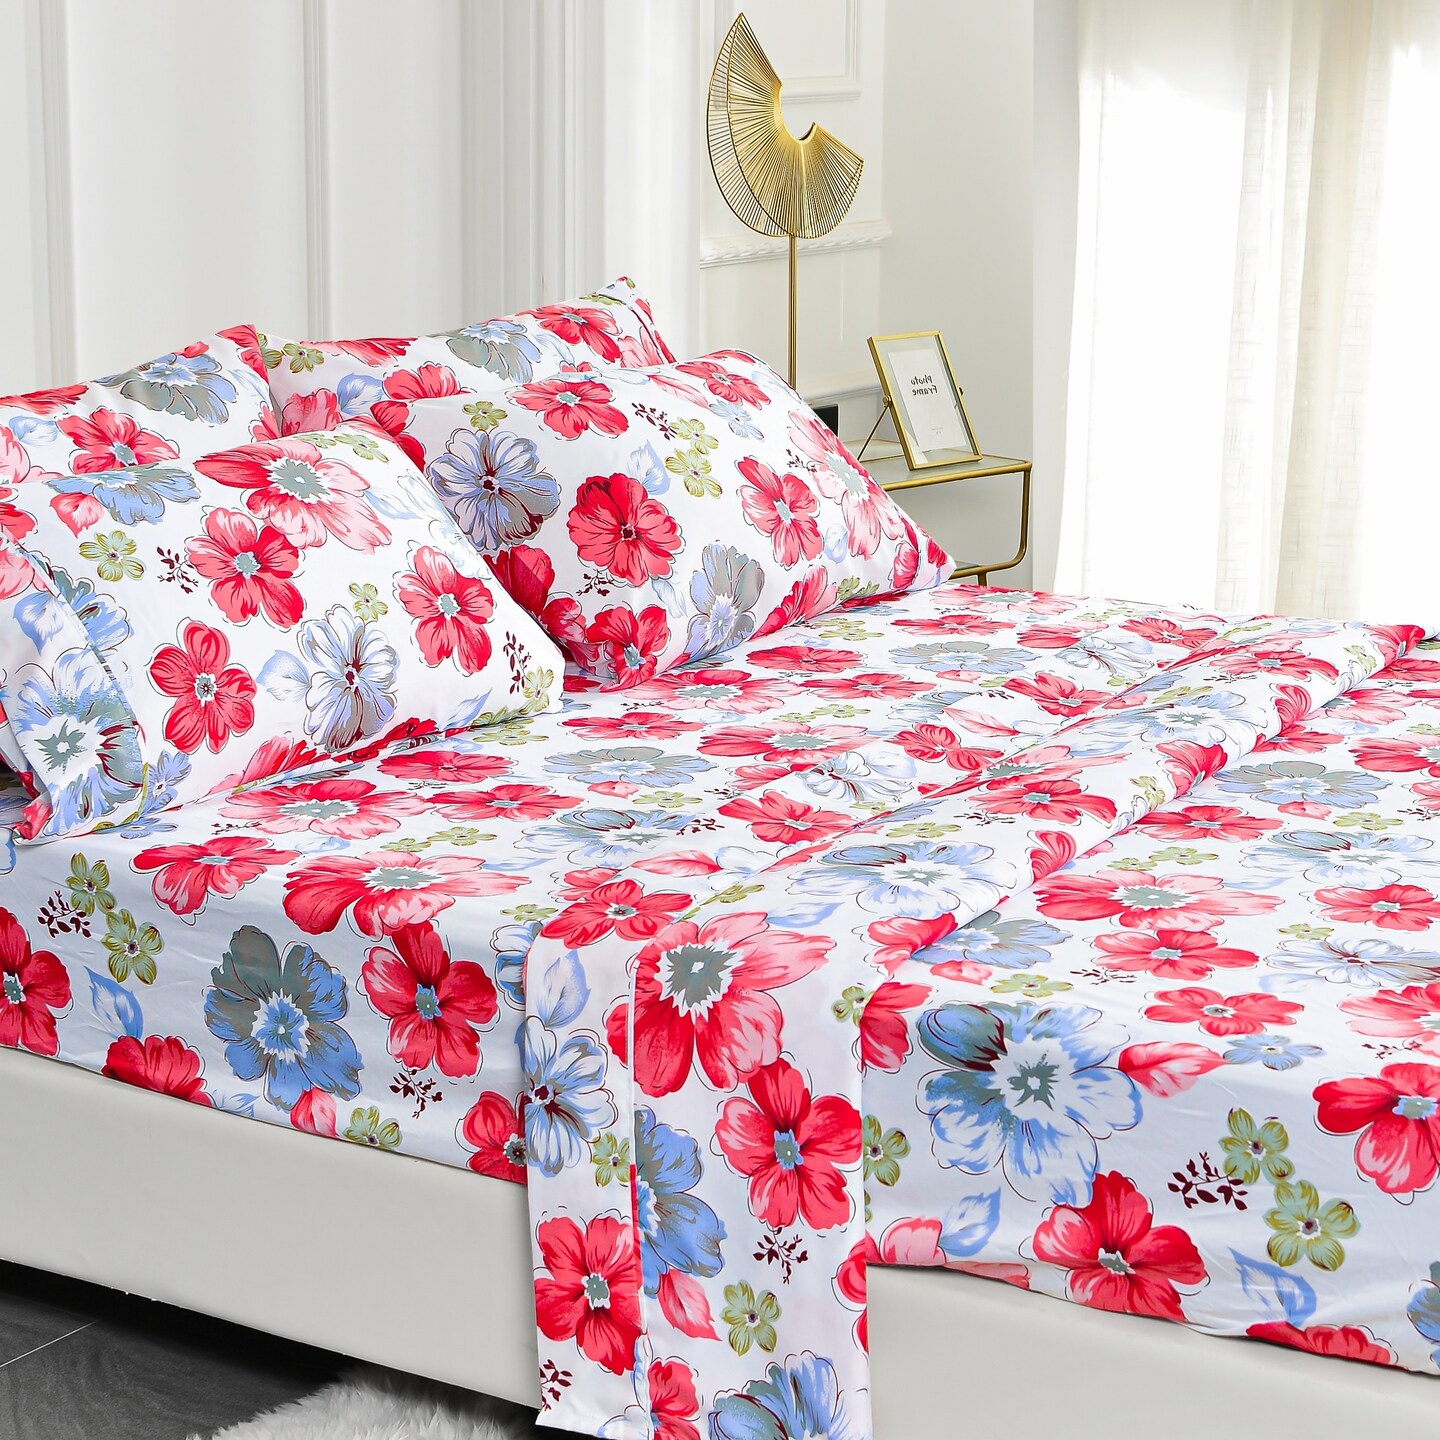 American Home Collection   Ultra Soft 4-6 Piece Red Floral Printed Bed Sheet Set